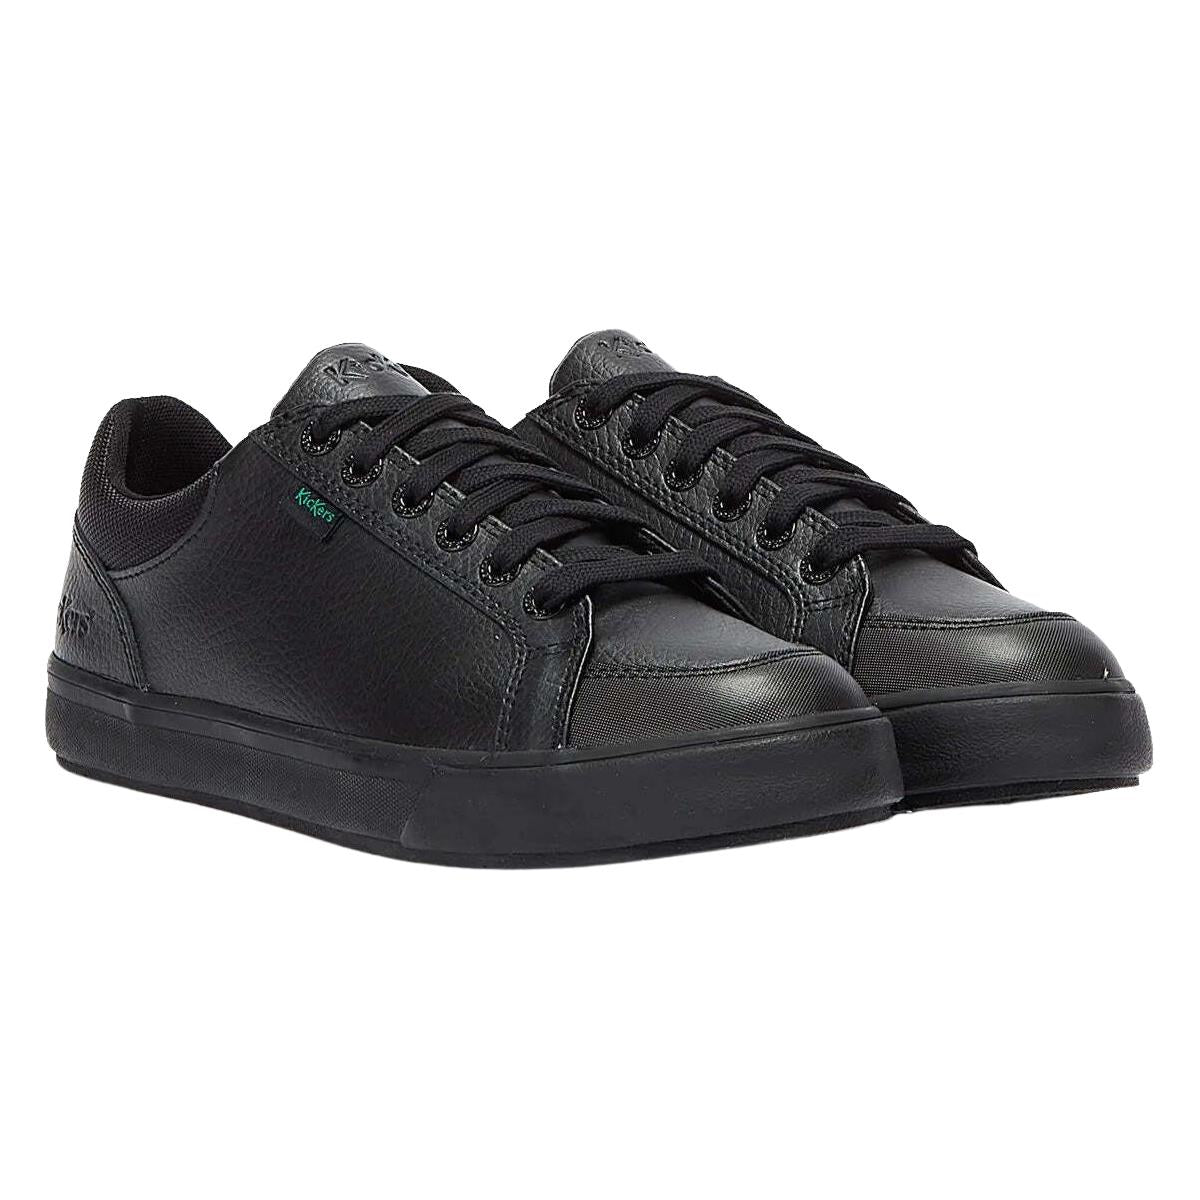 Kickers Tovni Lo Padded Black Leather Shoes 1-16653